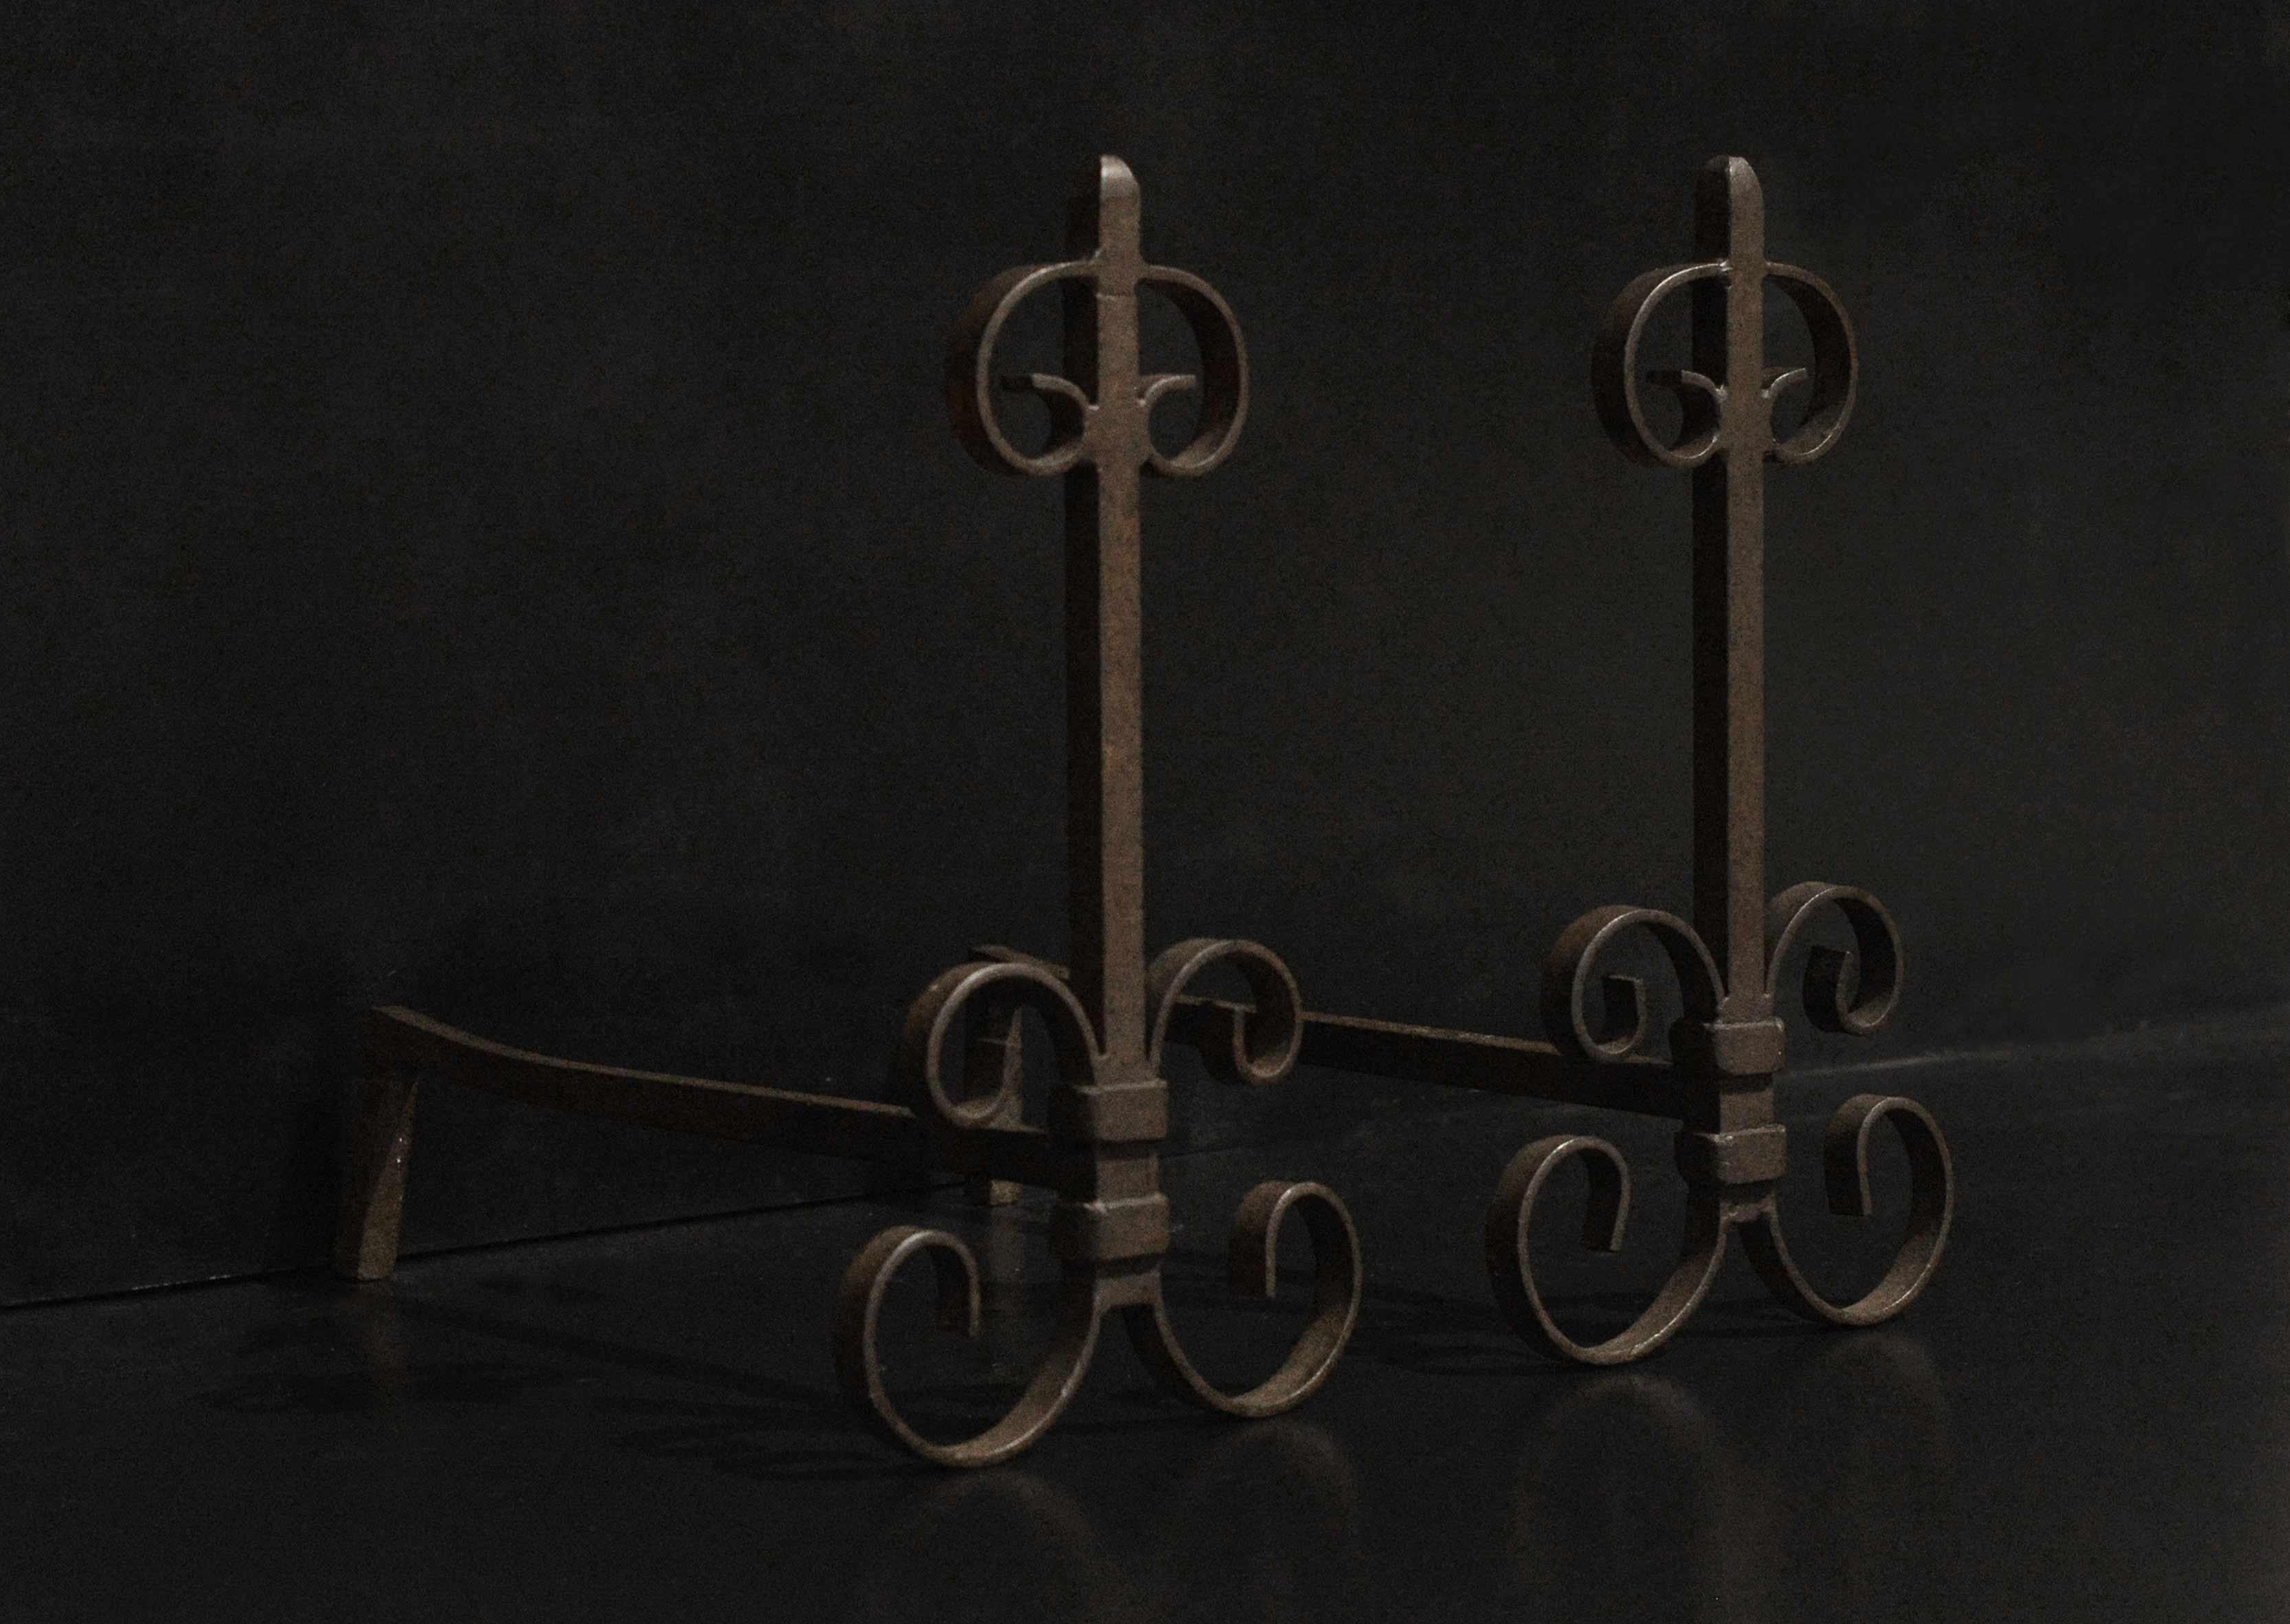 A pair of French wrought iron firedogs with scrolled detailing, French, circa 1900. With a waxed finished, could be polished if required.

Measurements:
Height: 470 mm 18 1/2 in
Width: 250 mm 9 7/8 in
Depth: 510 mm 20 1/8 in.
 